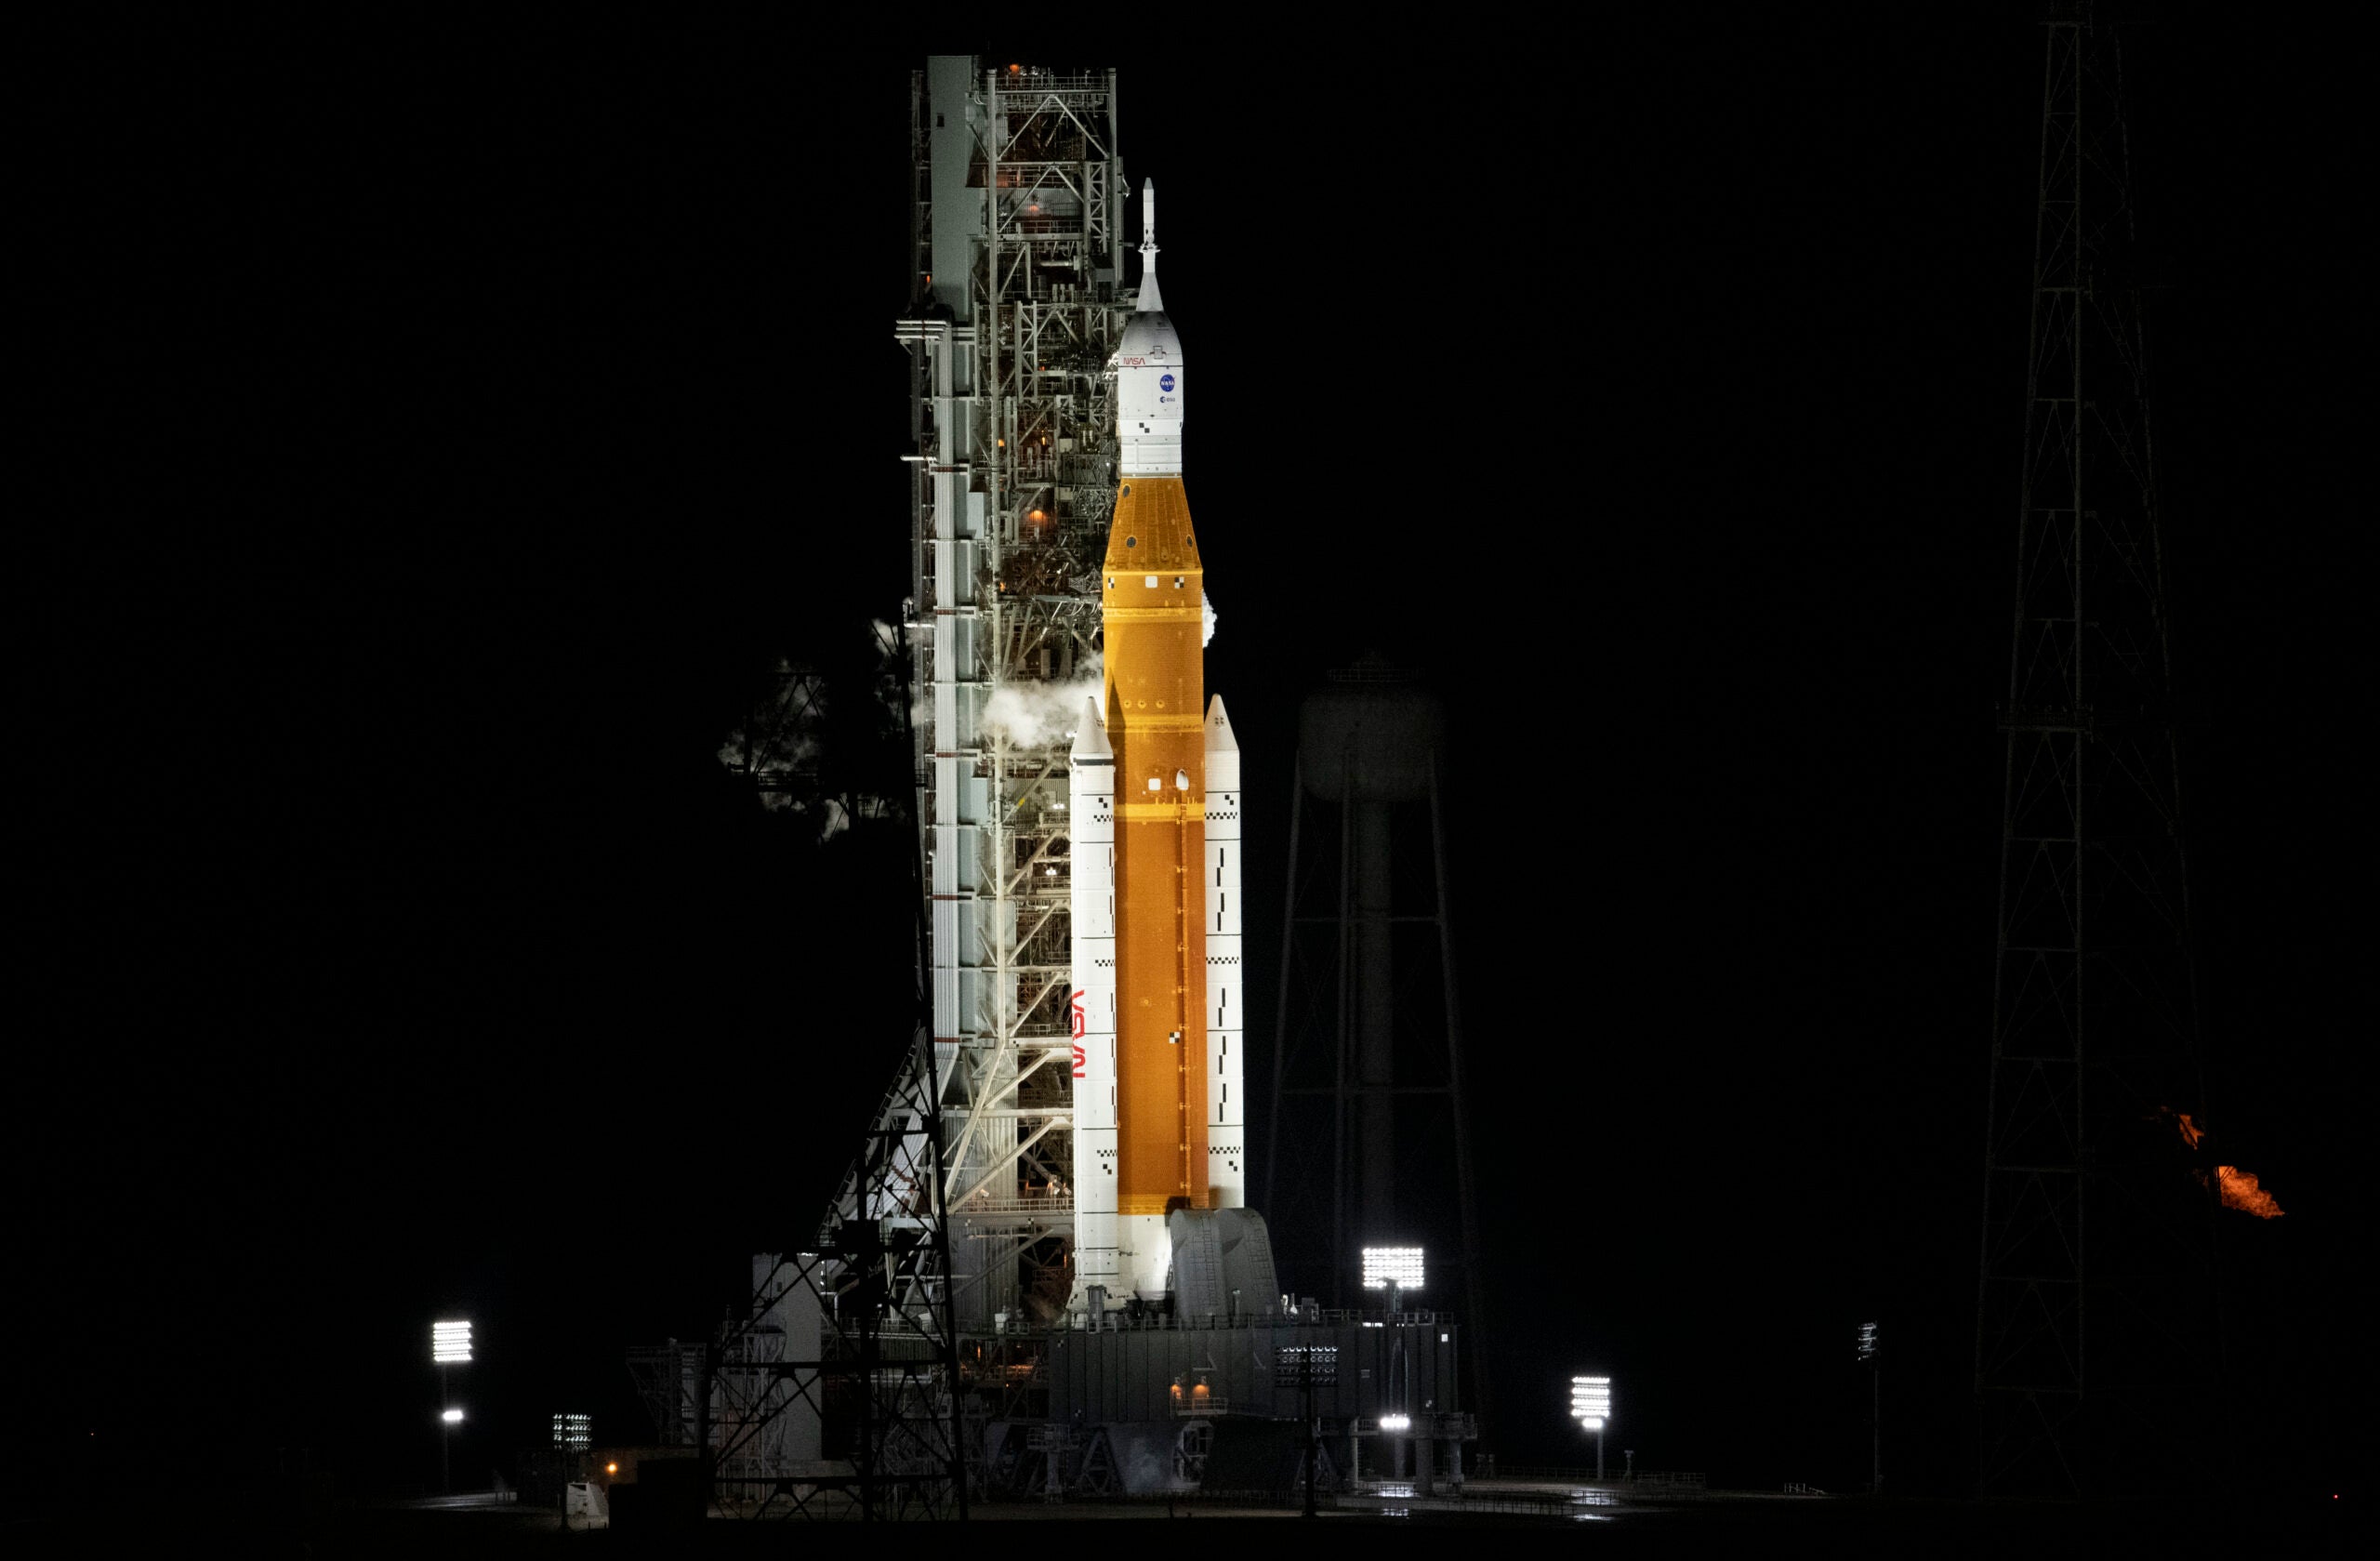 NASA orange SLS rocket with Orion spacecraft on top at Kennedy Space Center launch pad